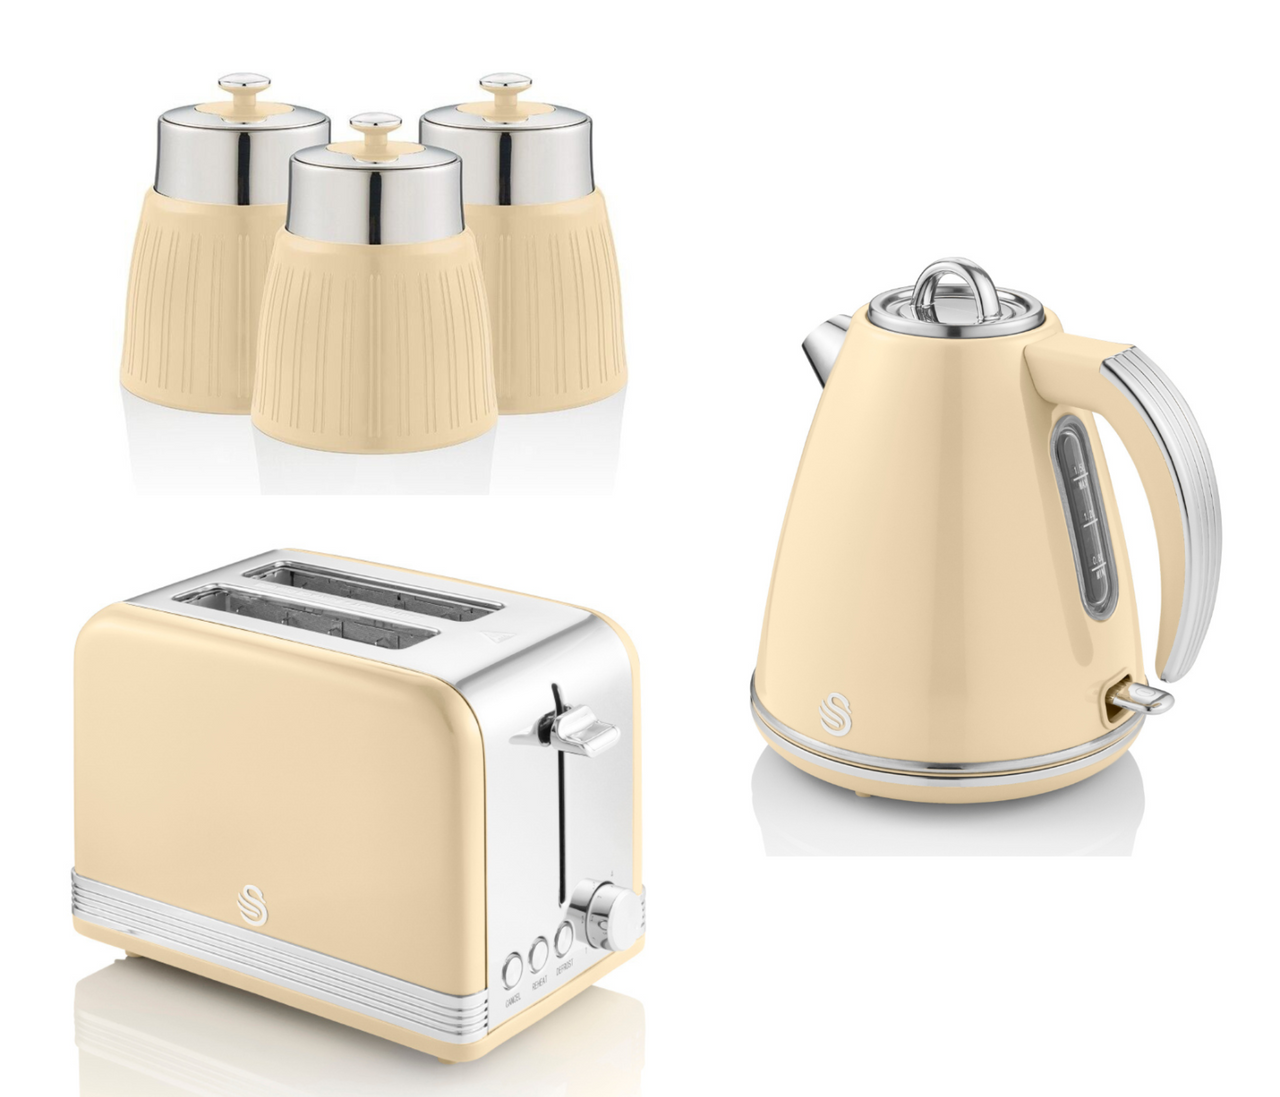 Swan Retro Cream 1.5L 3KW Jug Kettle, 2 Slice Toaster & Tea, Coffee, Sugar Canisters. Vintage Matching Kitchen Set of 5 in Cream